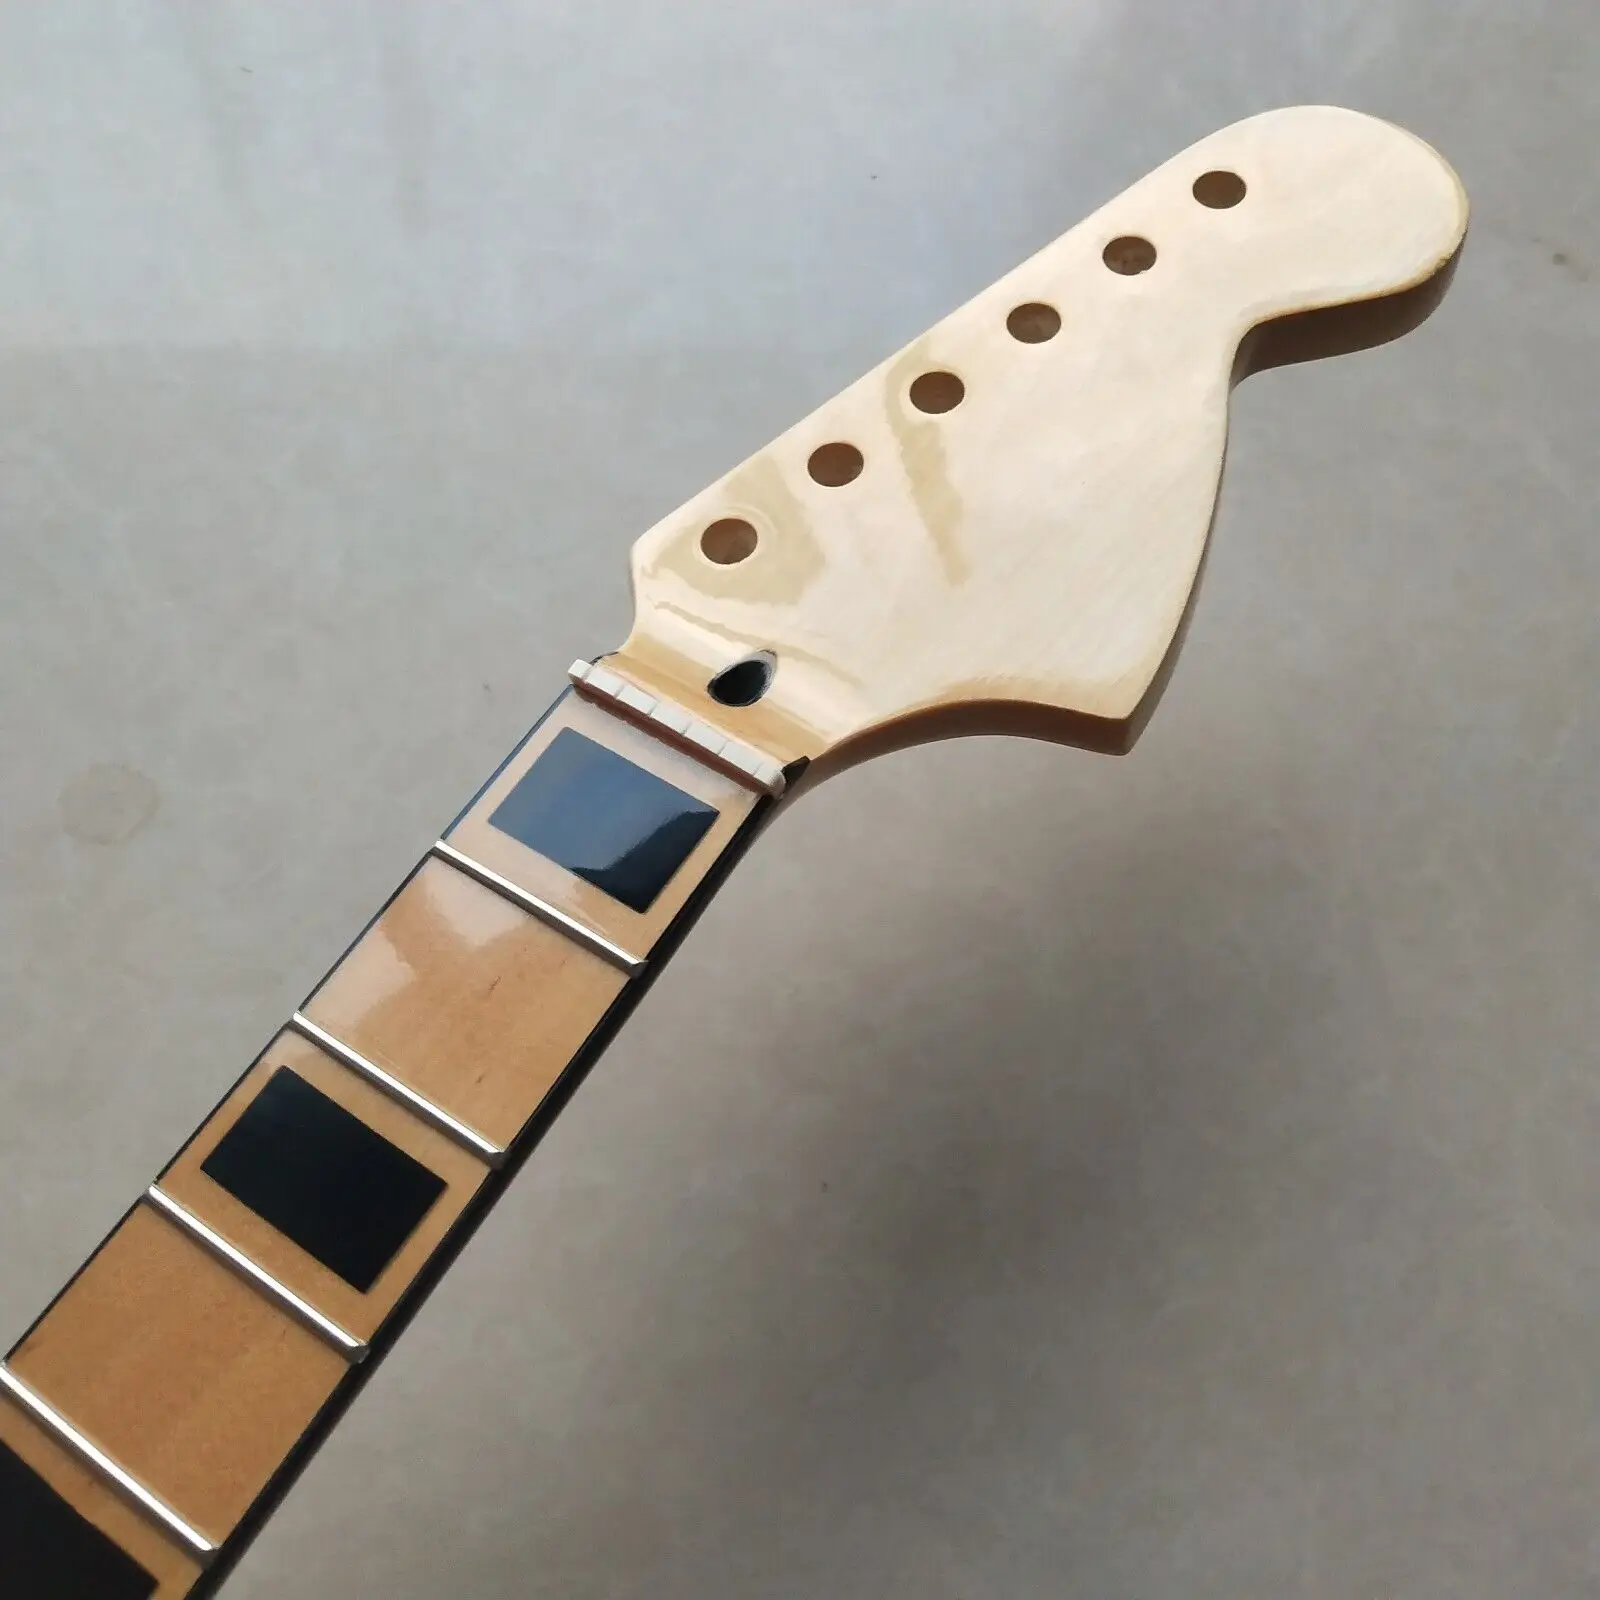 Enlarge Maple Electric Guitar Neck 22 Fret 25.5inch Maple Fingerboard inlay Gloss parts